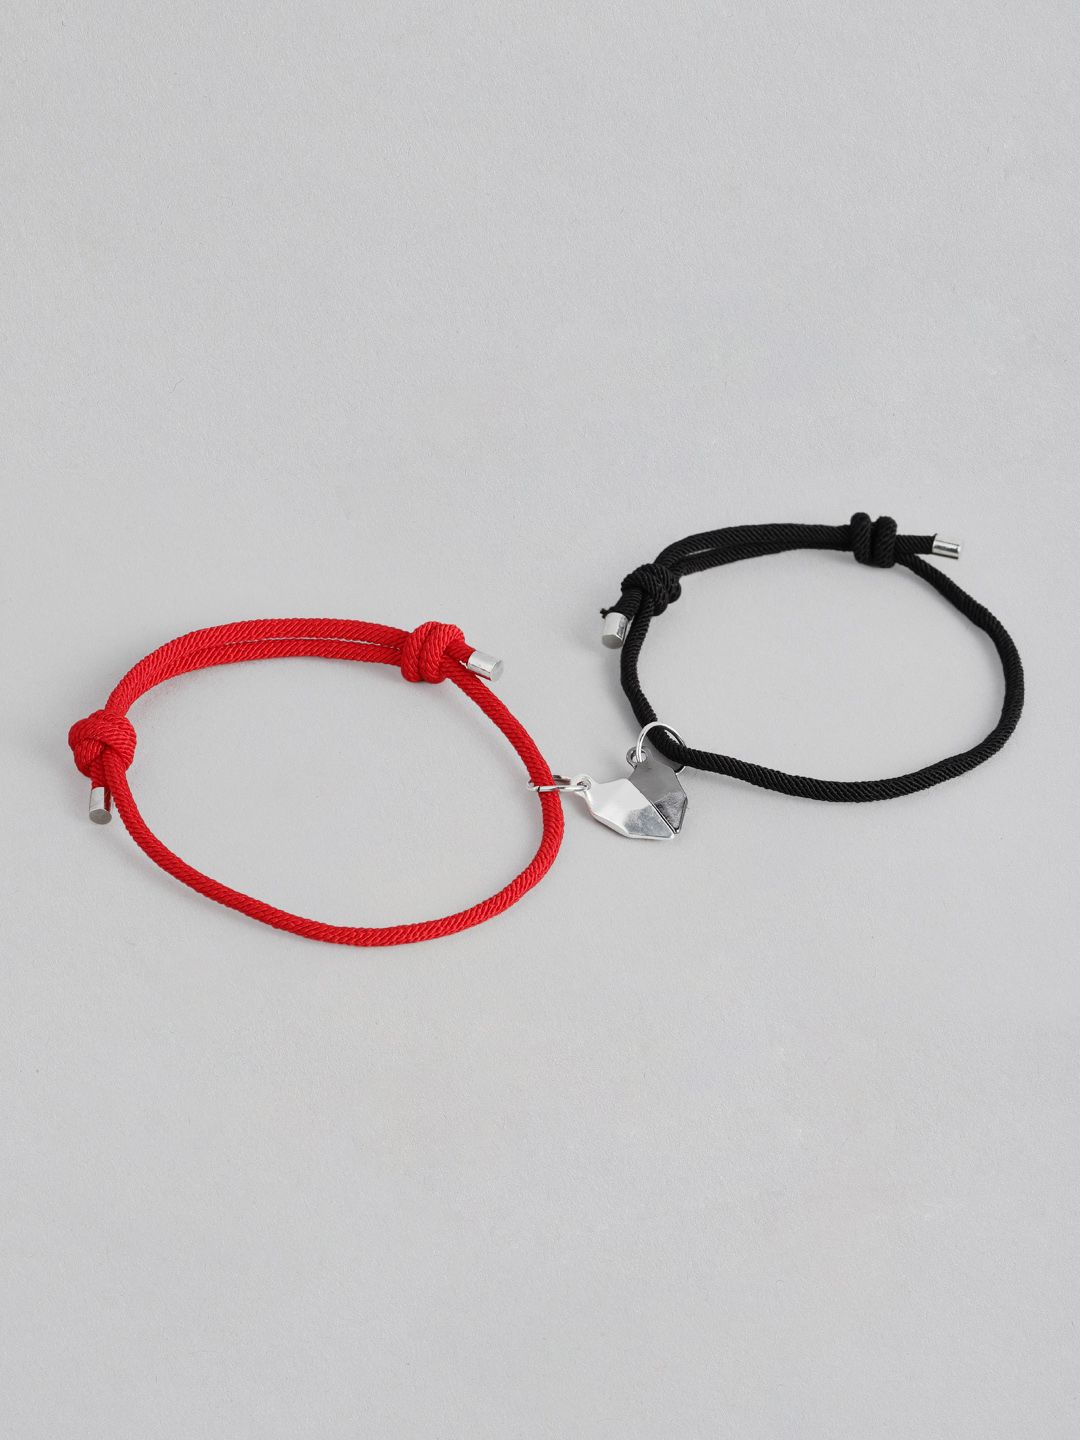 EL REGALO Unisex Set of 2 Black & Red Magnetic Heart Handcrafted Charm Bracelet Price in India